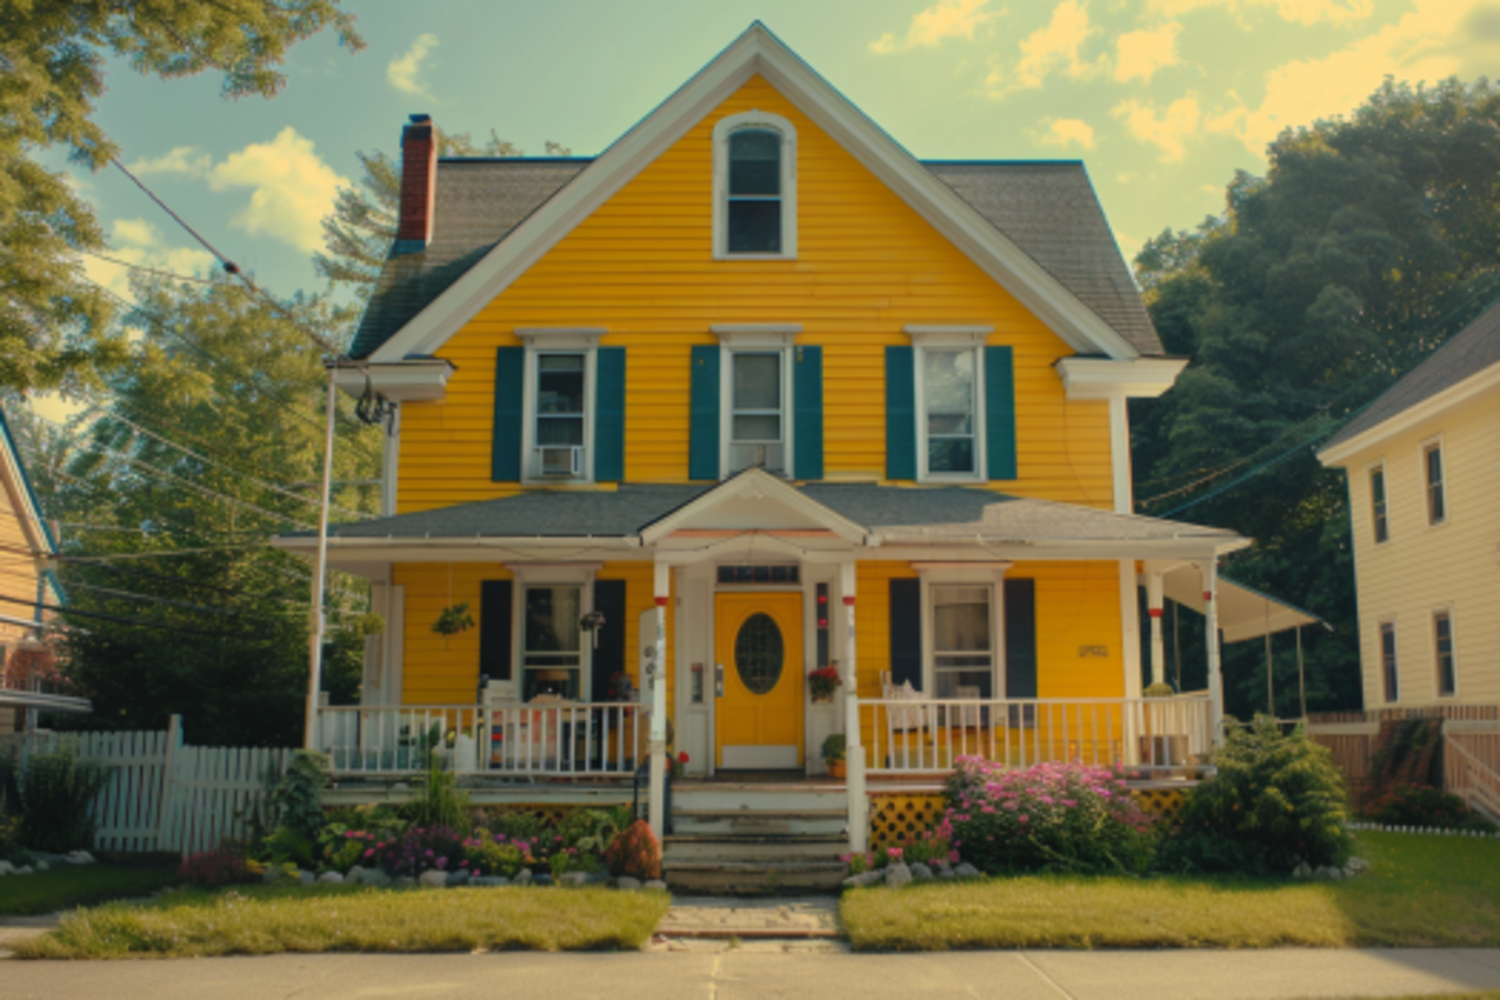 Victoria's beloved yellow house | Source: Midjourney